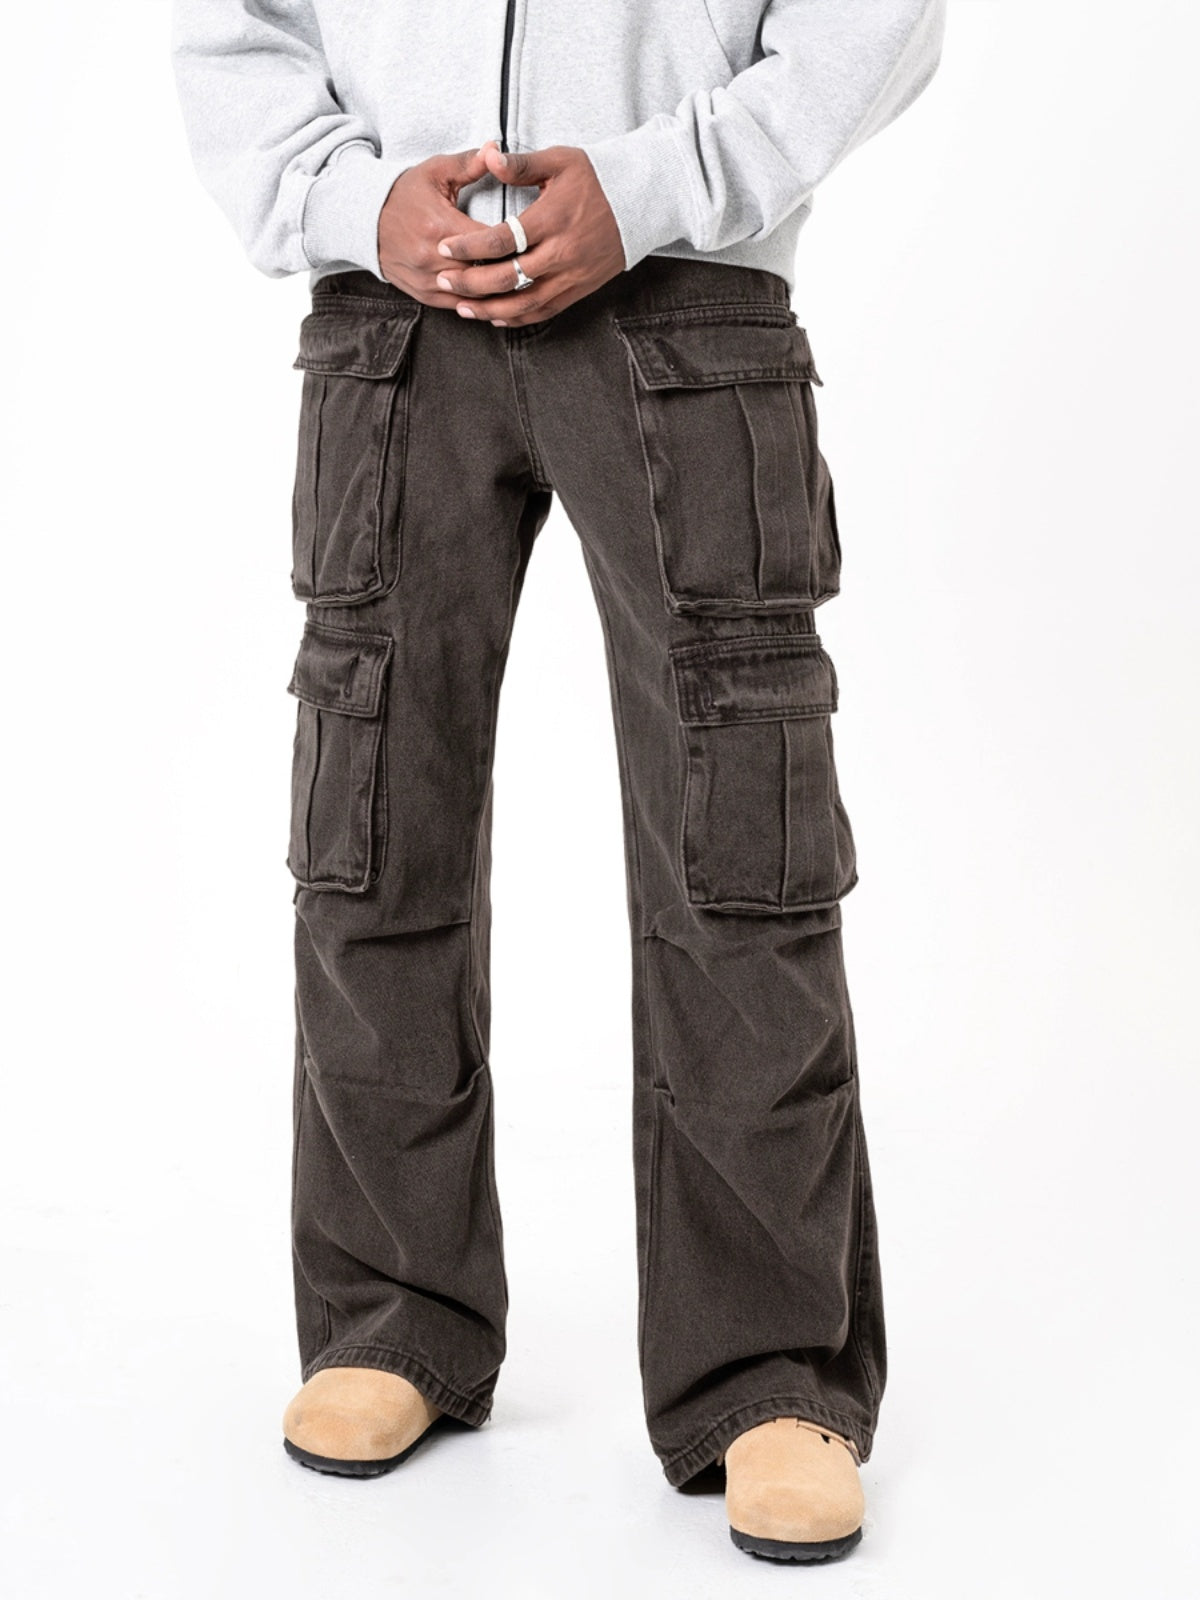 F3F Select Washed Functional Multi Pocket Work Pants